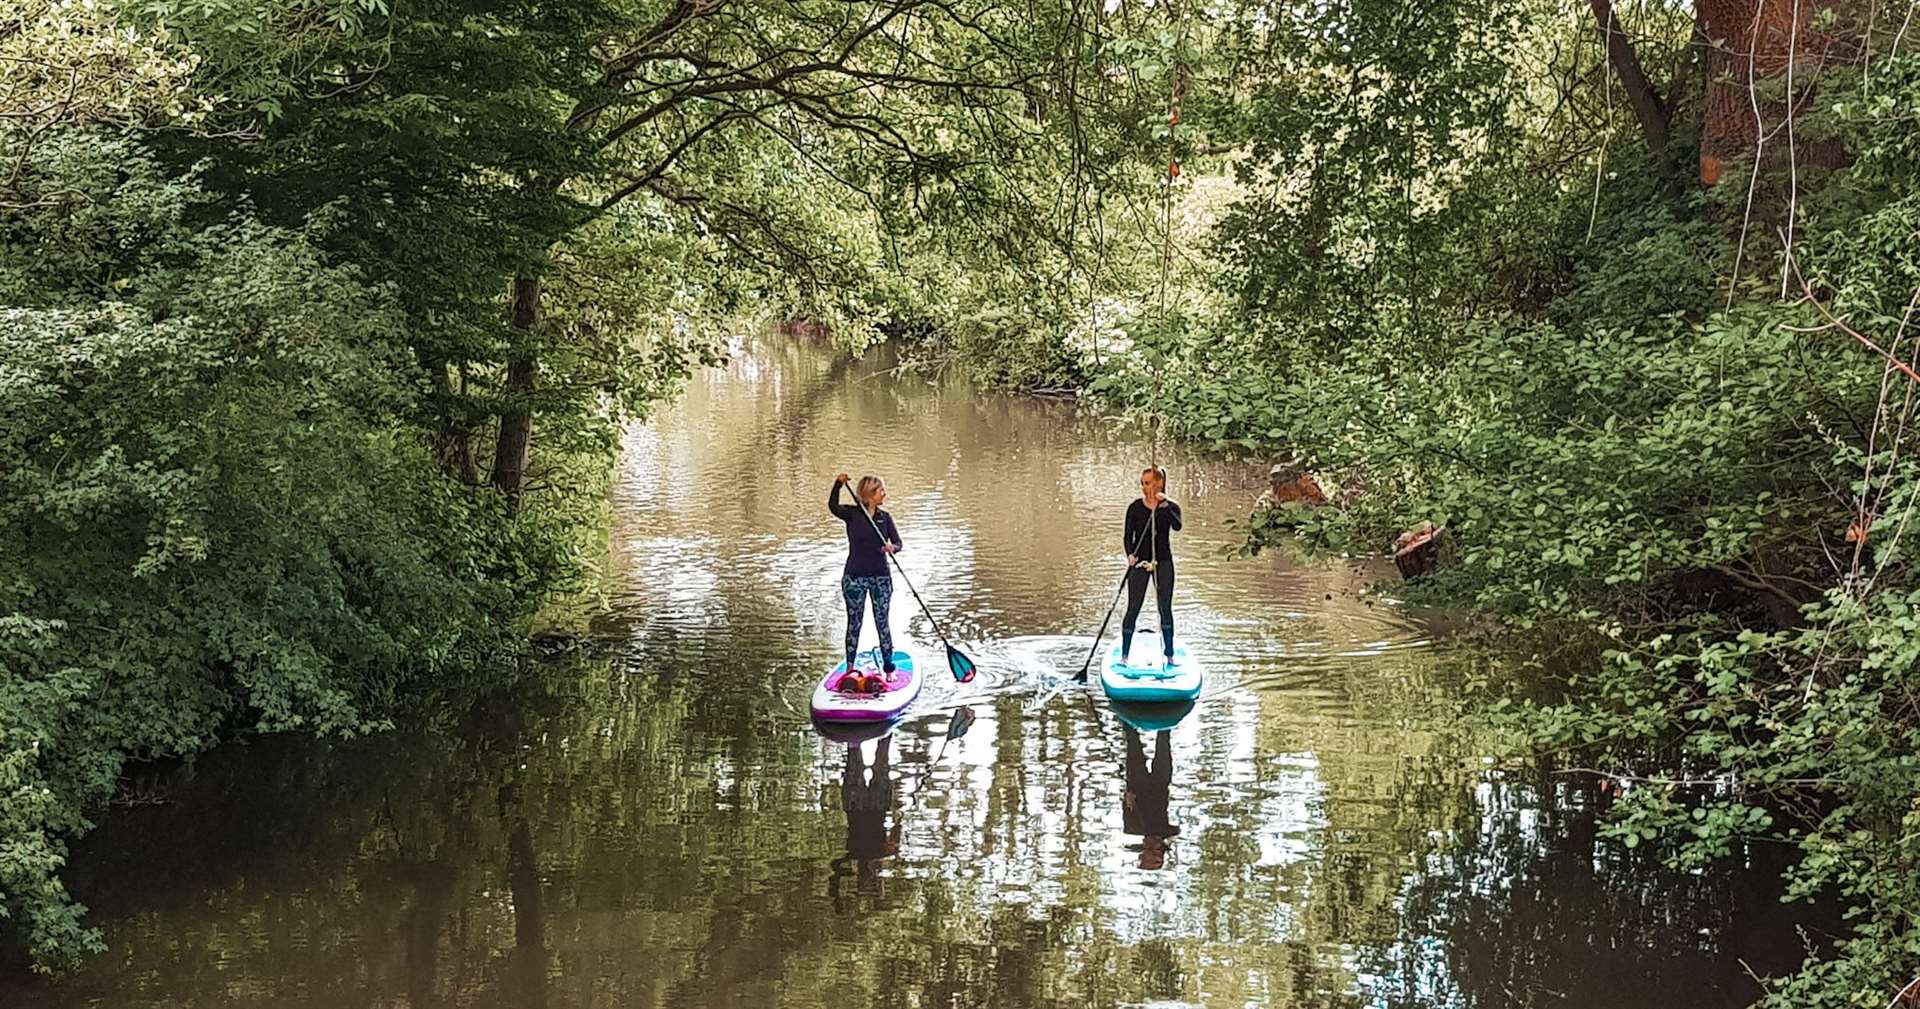 It's on an unexplored stretch of the River Medway. Picture: Paddle Cabin